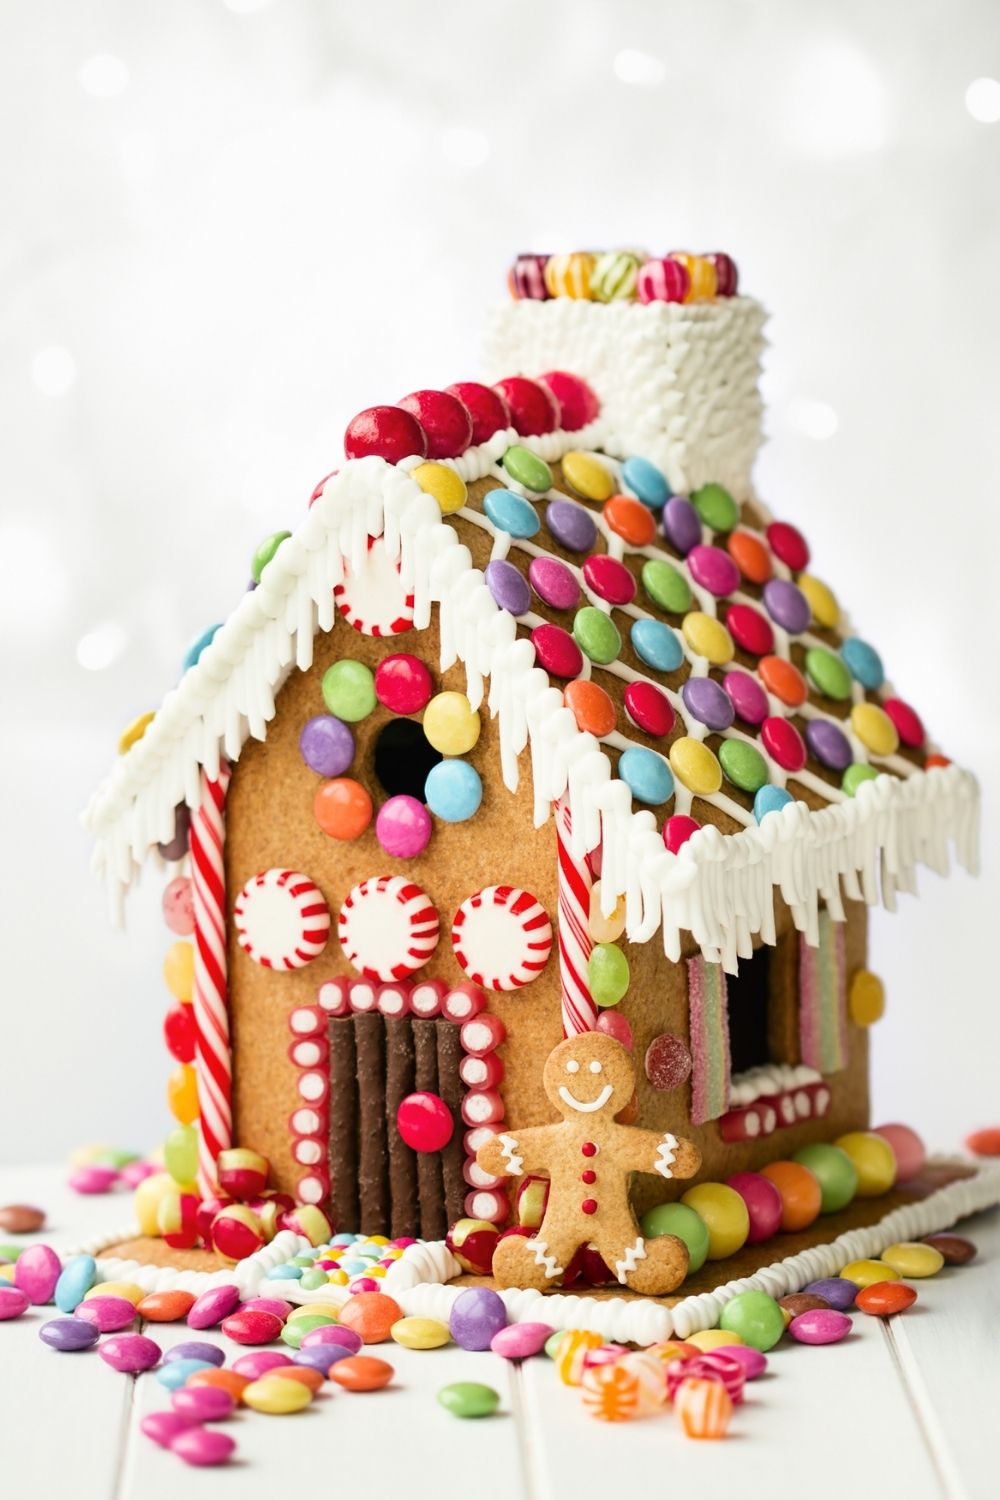 25 Gingerbread House Ideas (+ Unique Decorating Designs) - Insanely Good